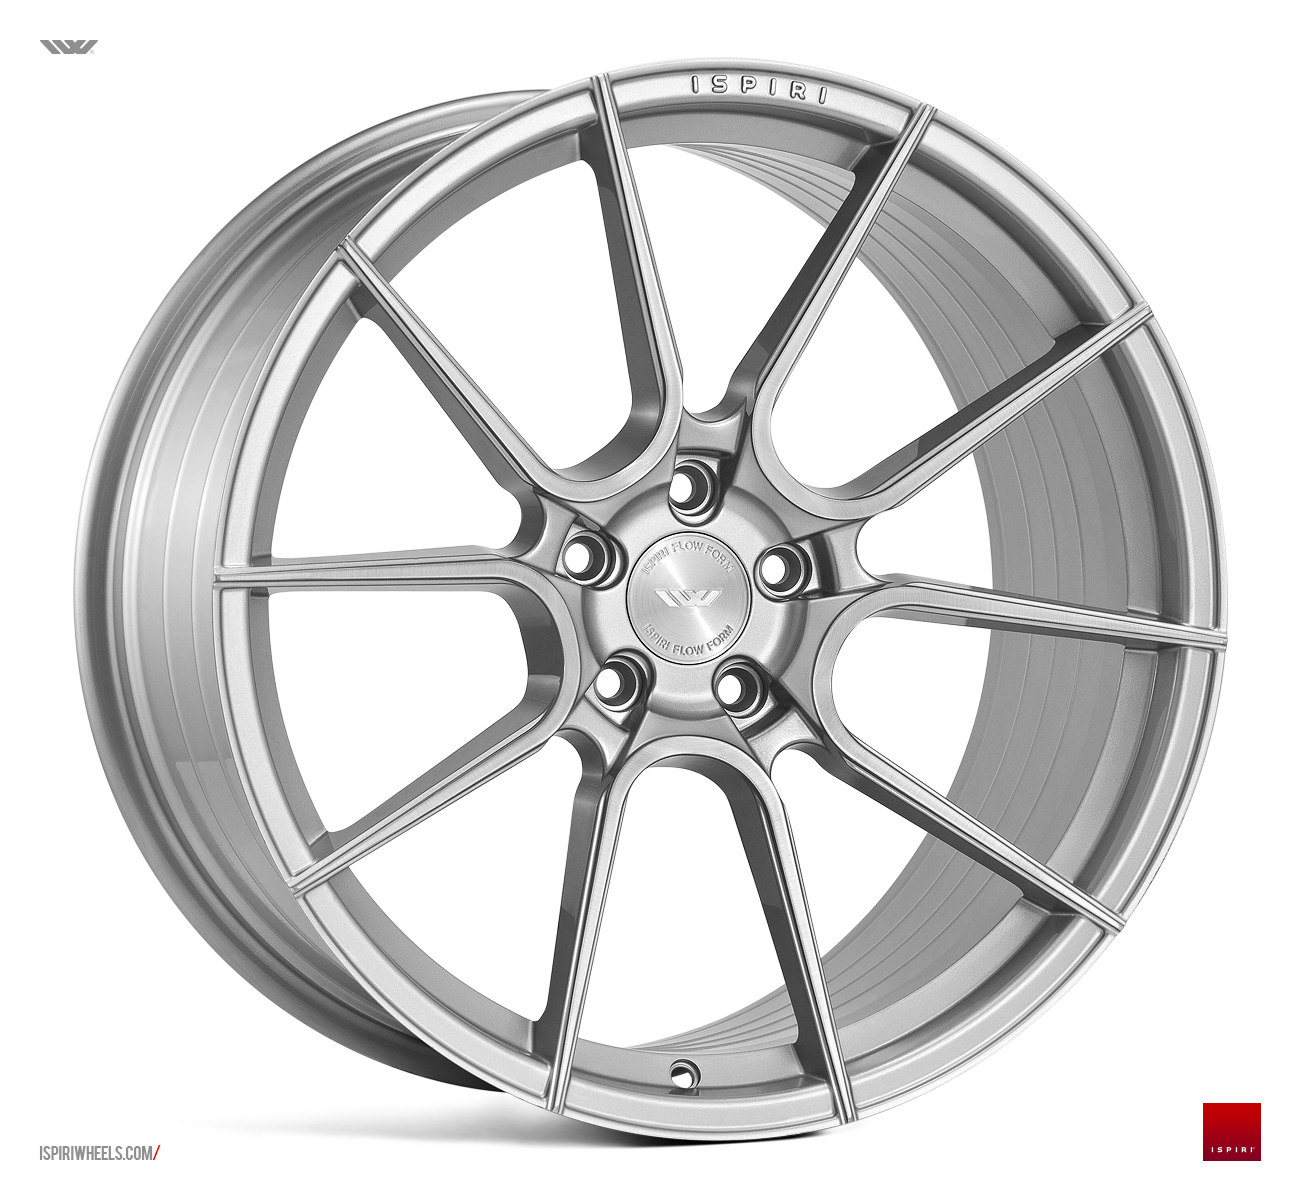 NEW 19  ISPIRI FFR6 TWIN 5 SPOKE ALLOY WHEELS IN PURE SILVER BRUSHED  VARIOUS FITMENTS AVAILABLE